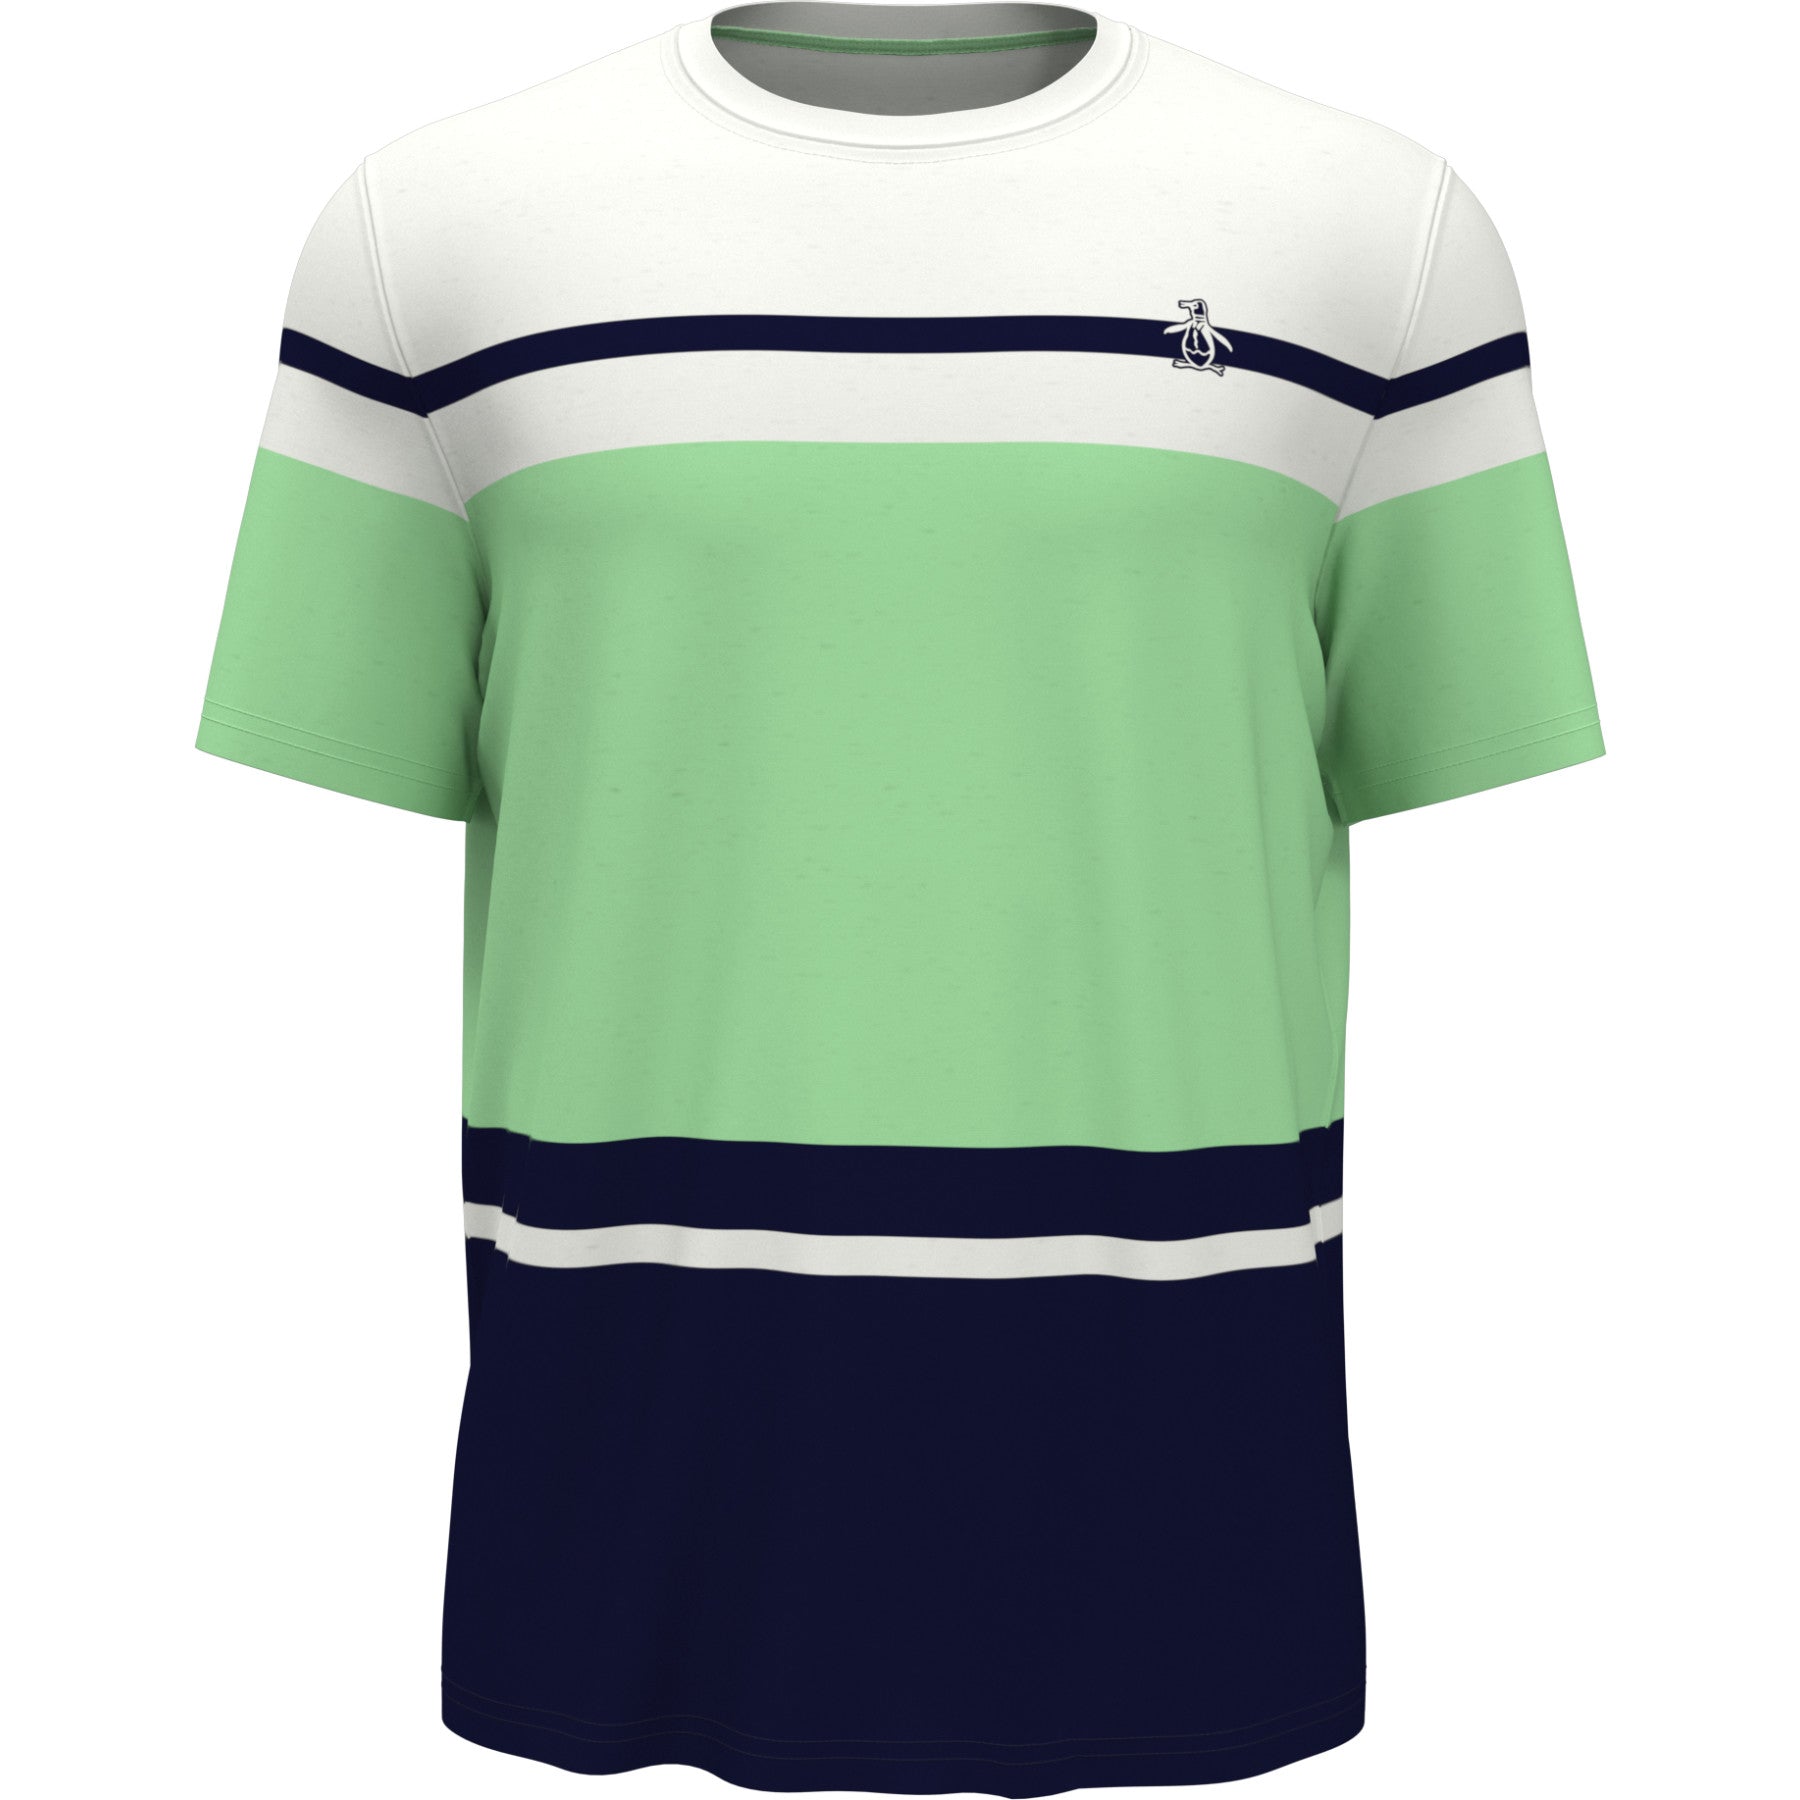 View Colour Block Performance Tennis TShirt In Bright White information